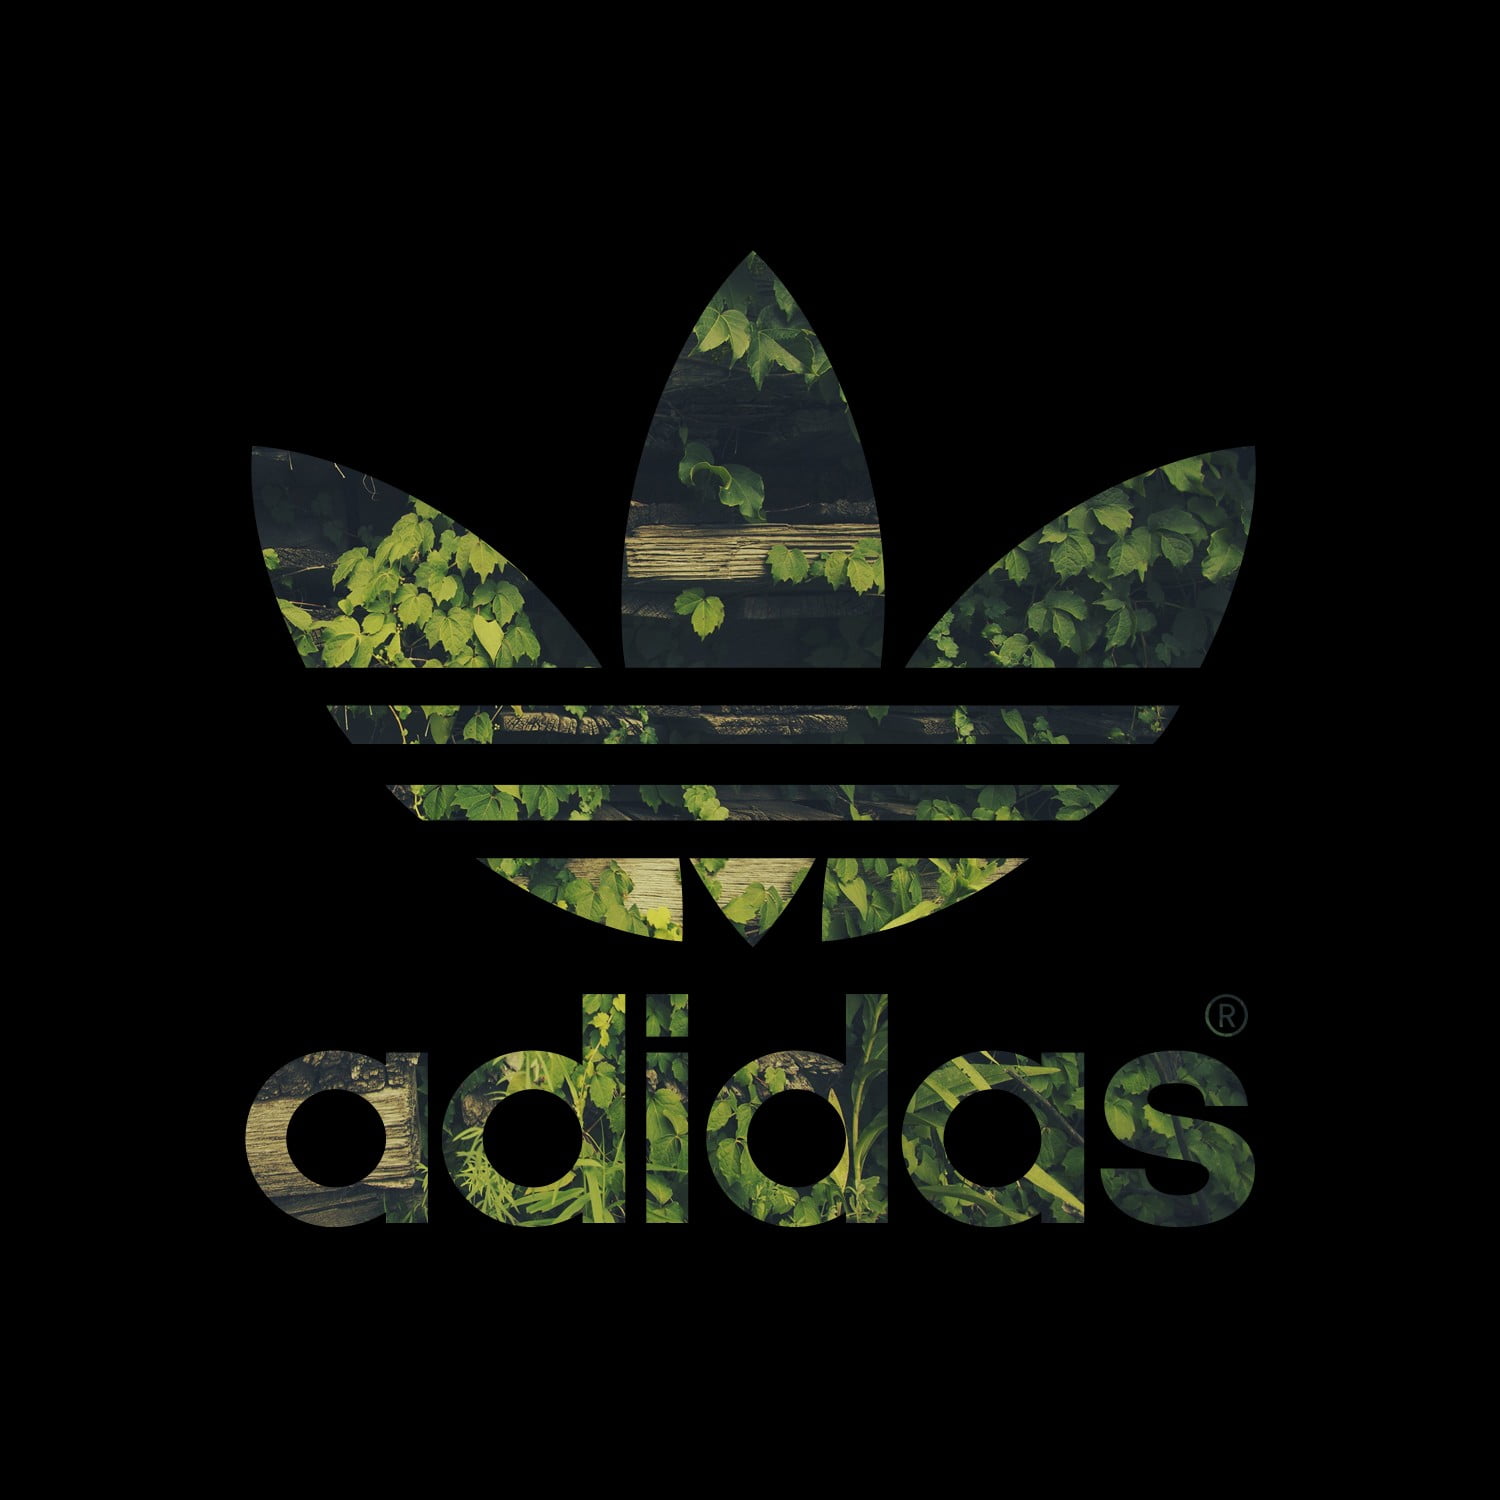 adidas logo, leaves, night, communication, no people, text, architecture